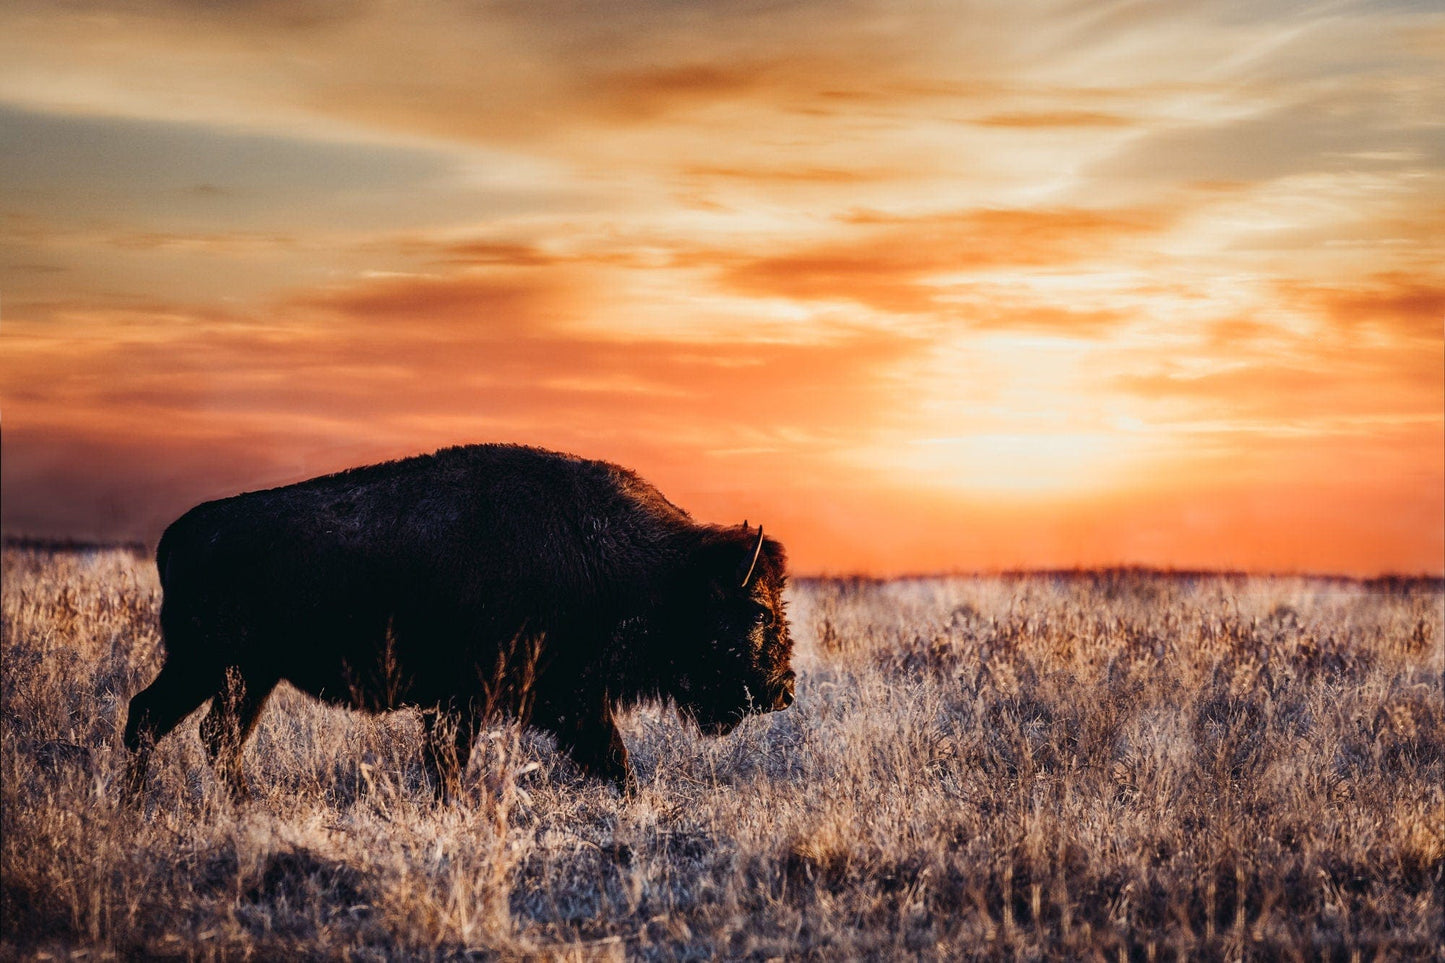 Teri James Photography Wall Art Paper Photo Print / 12 x 18 Inches Bison Art - Colorful Orange Sunset Canvas